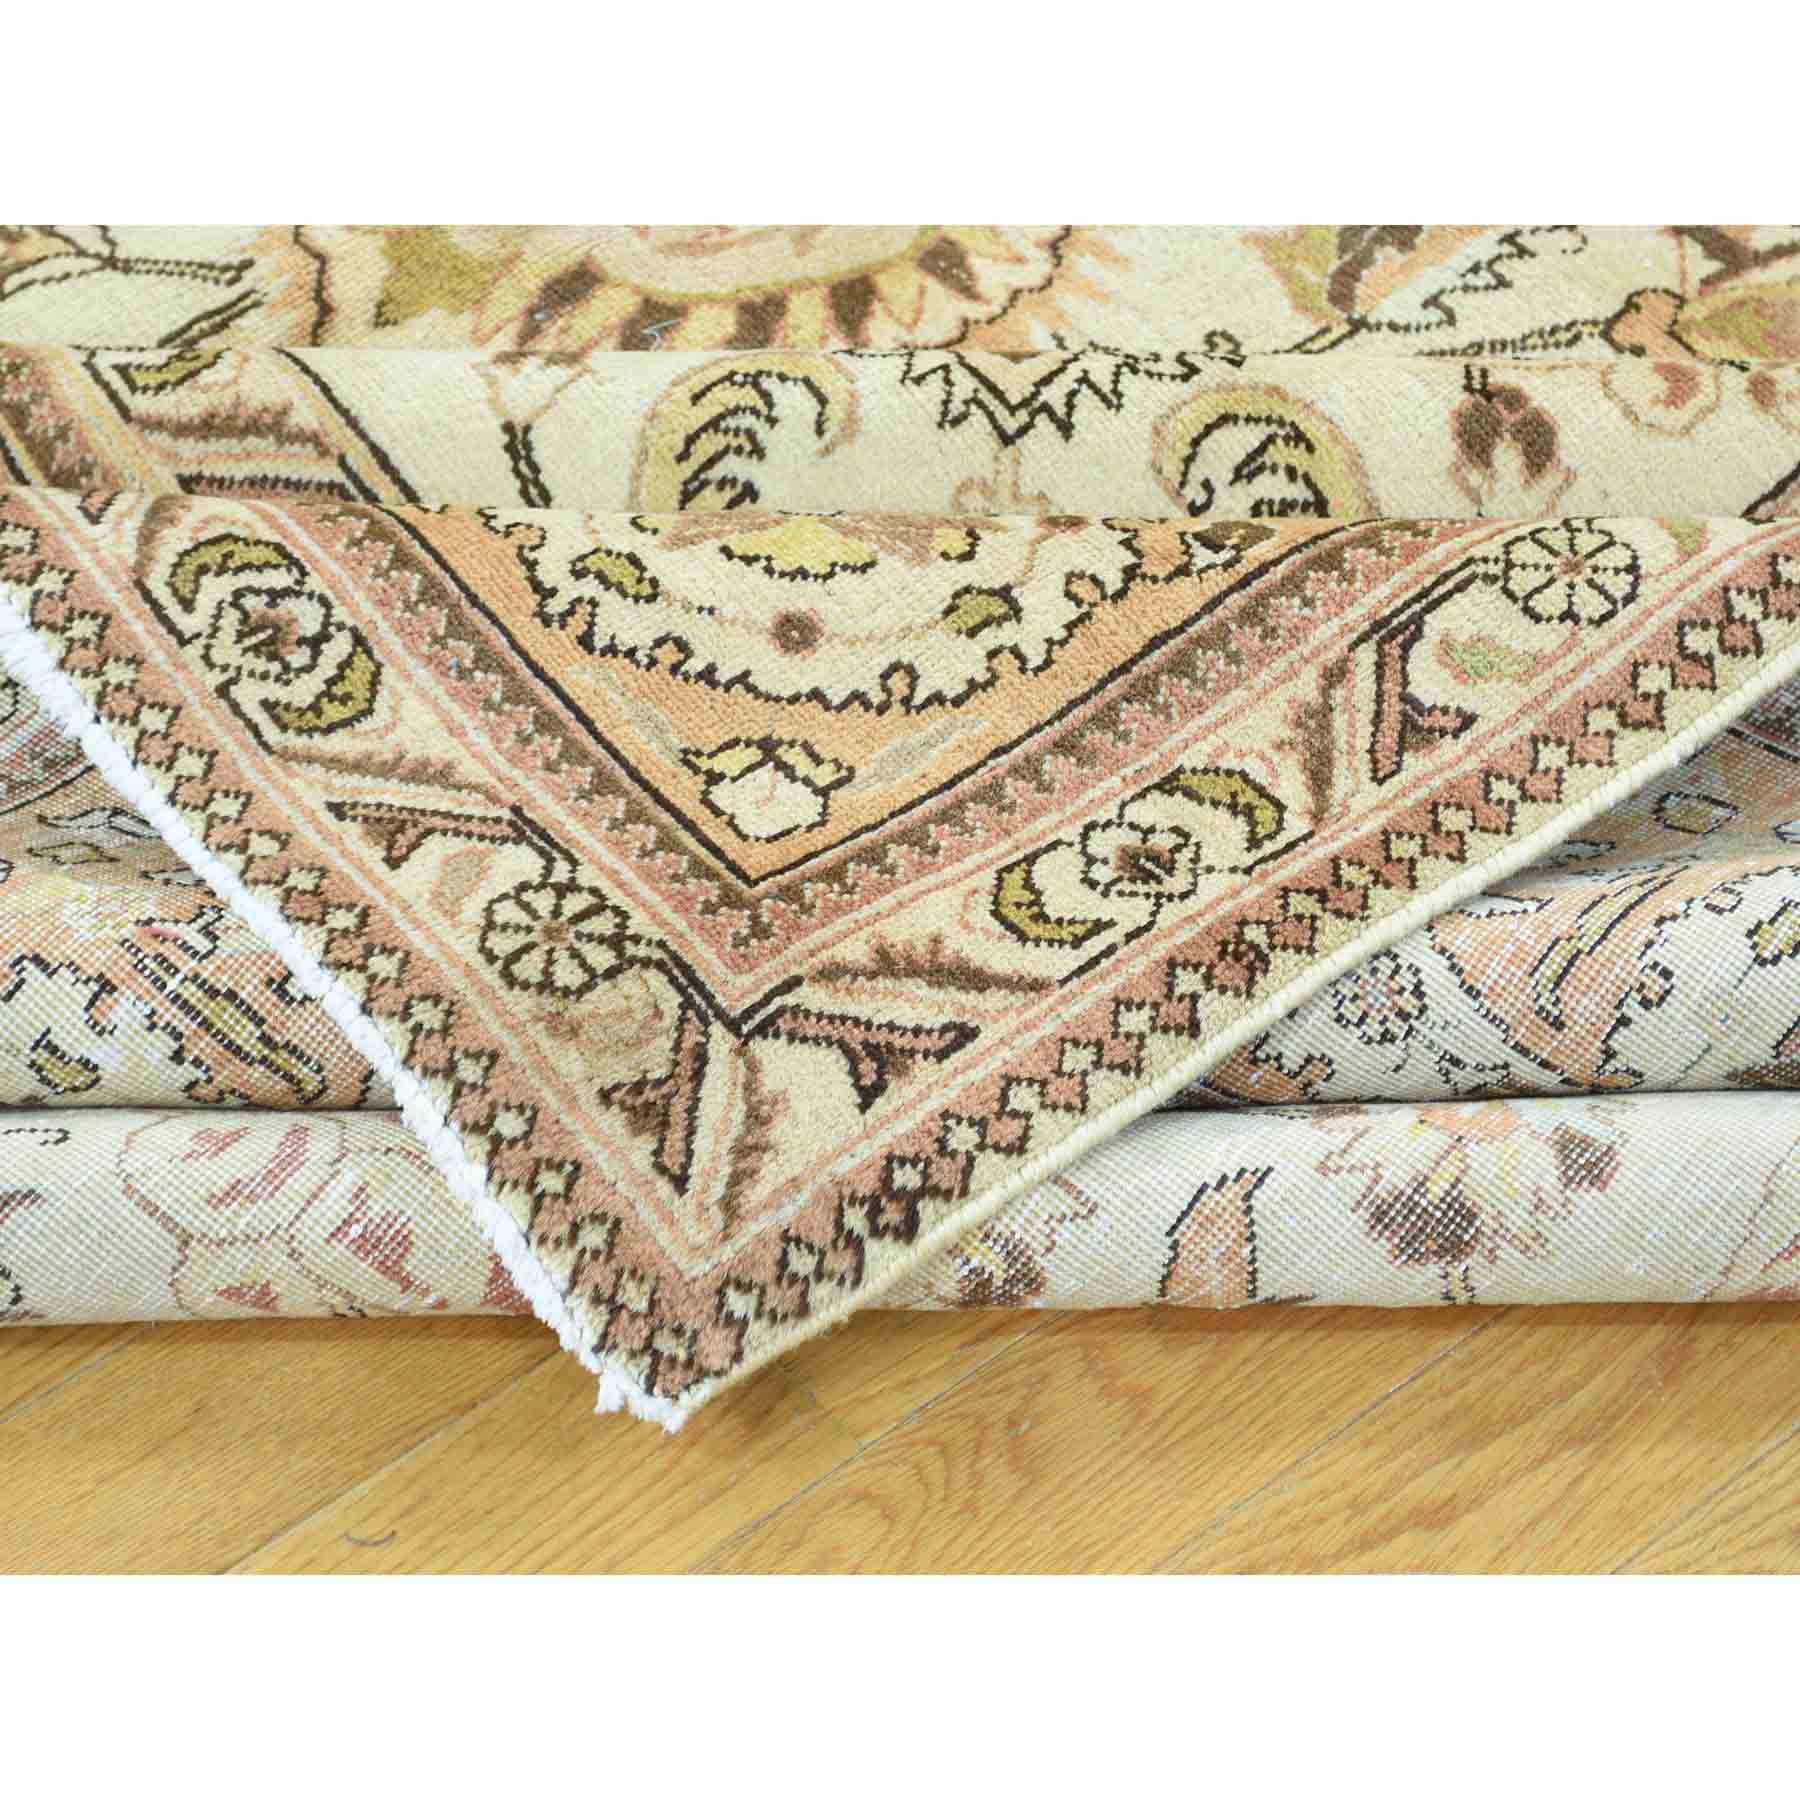 Antique-Hand-Knotted-Rug-160685